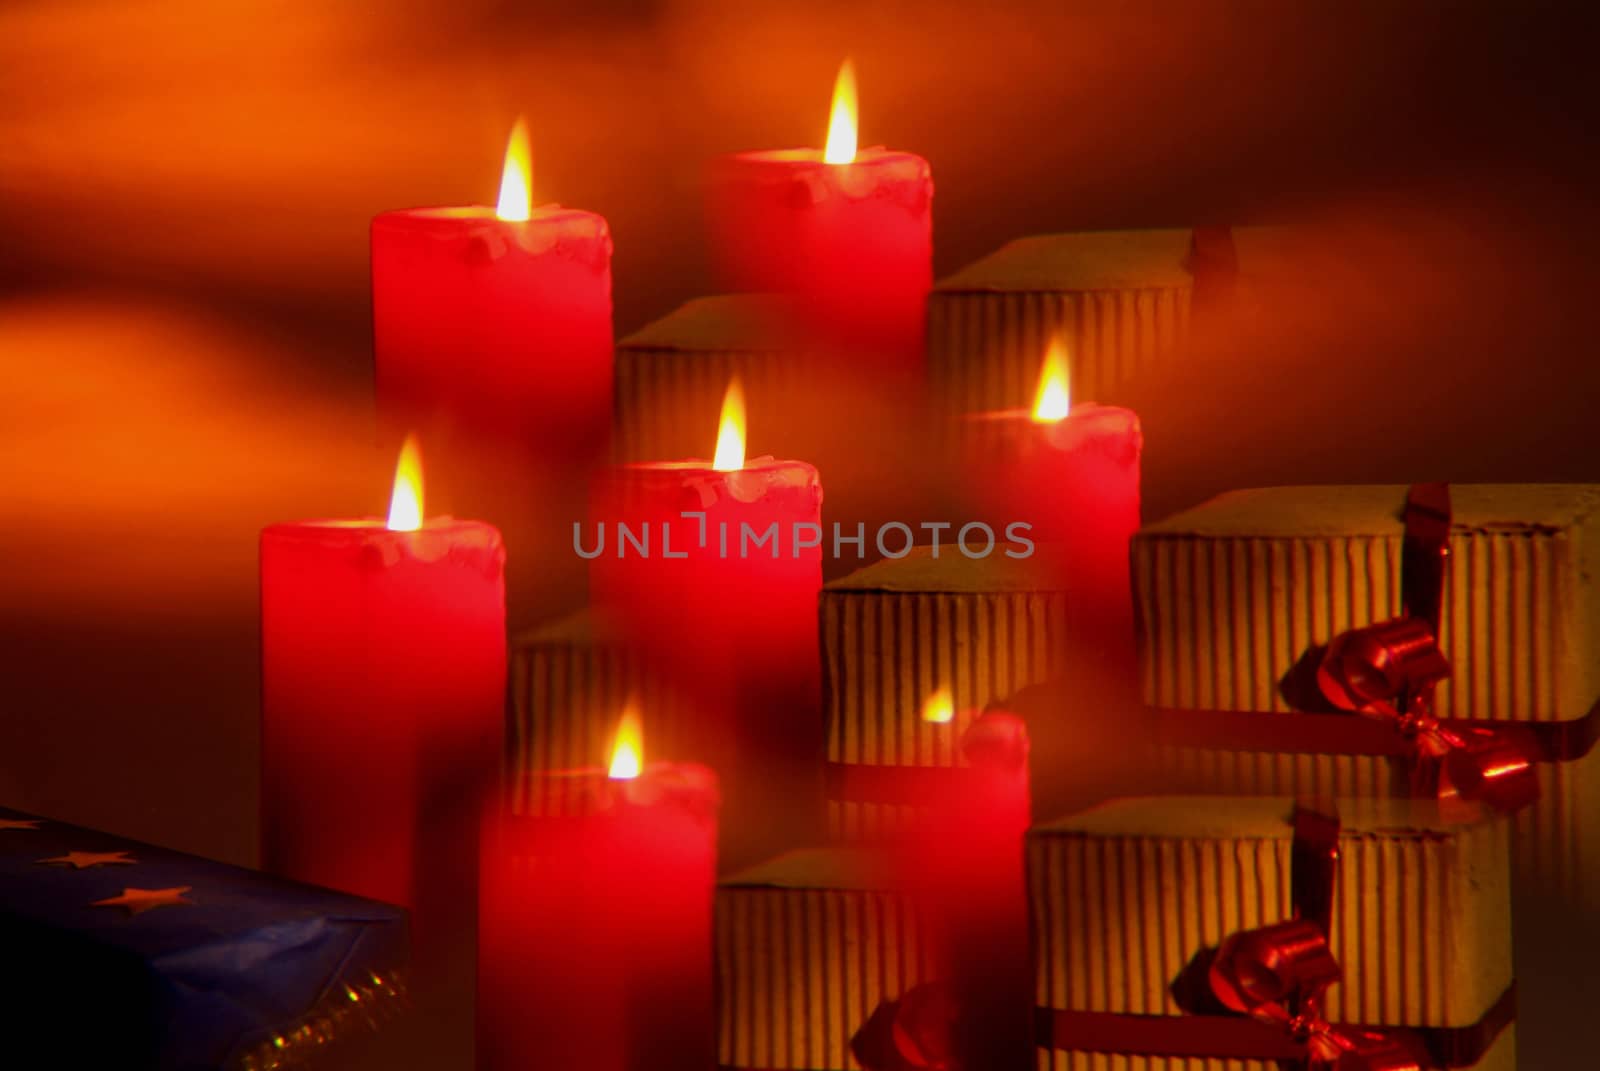 Candle flame close up on a black background by romeocharly